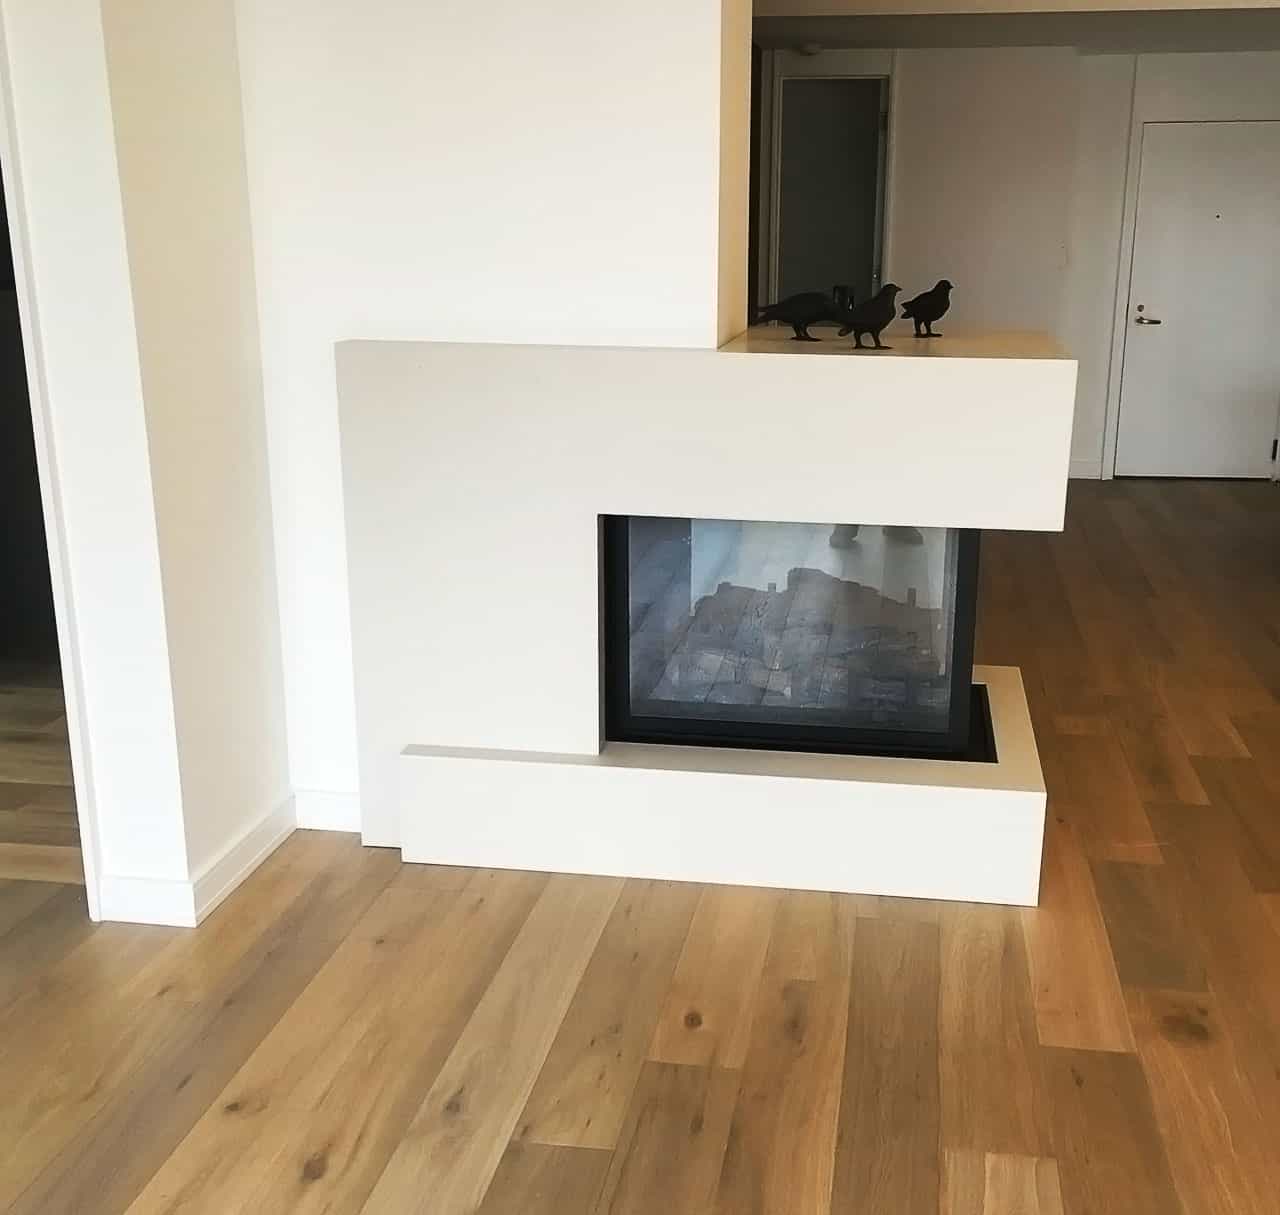 installs modern fireplaces for a cozy feel